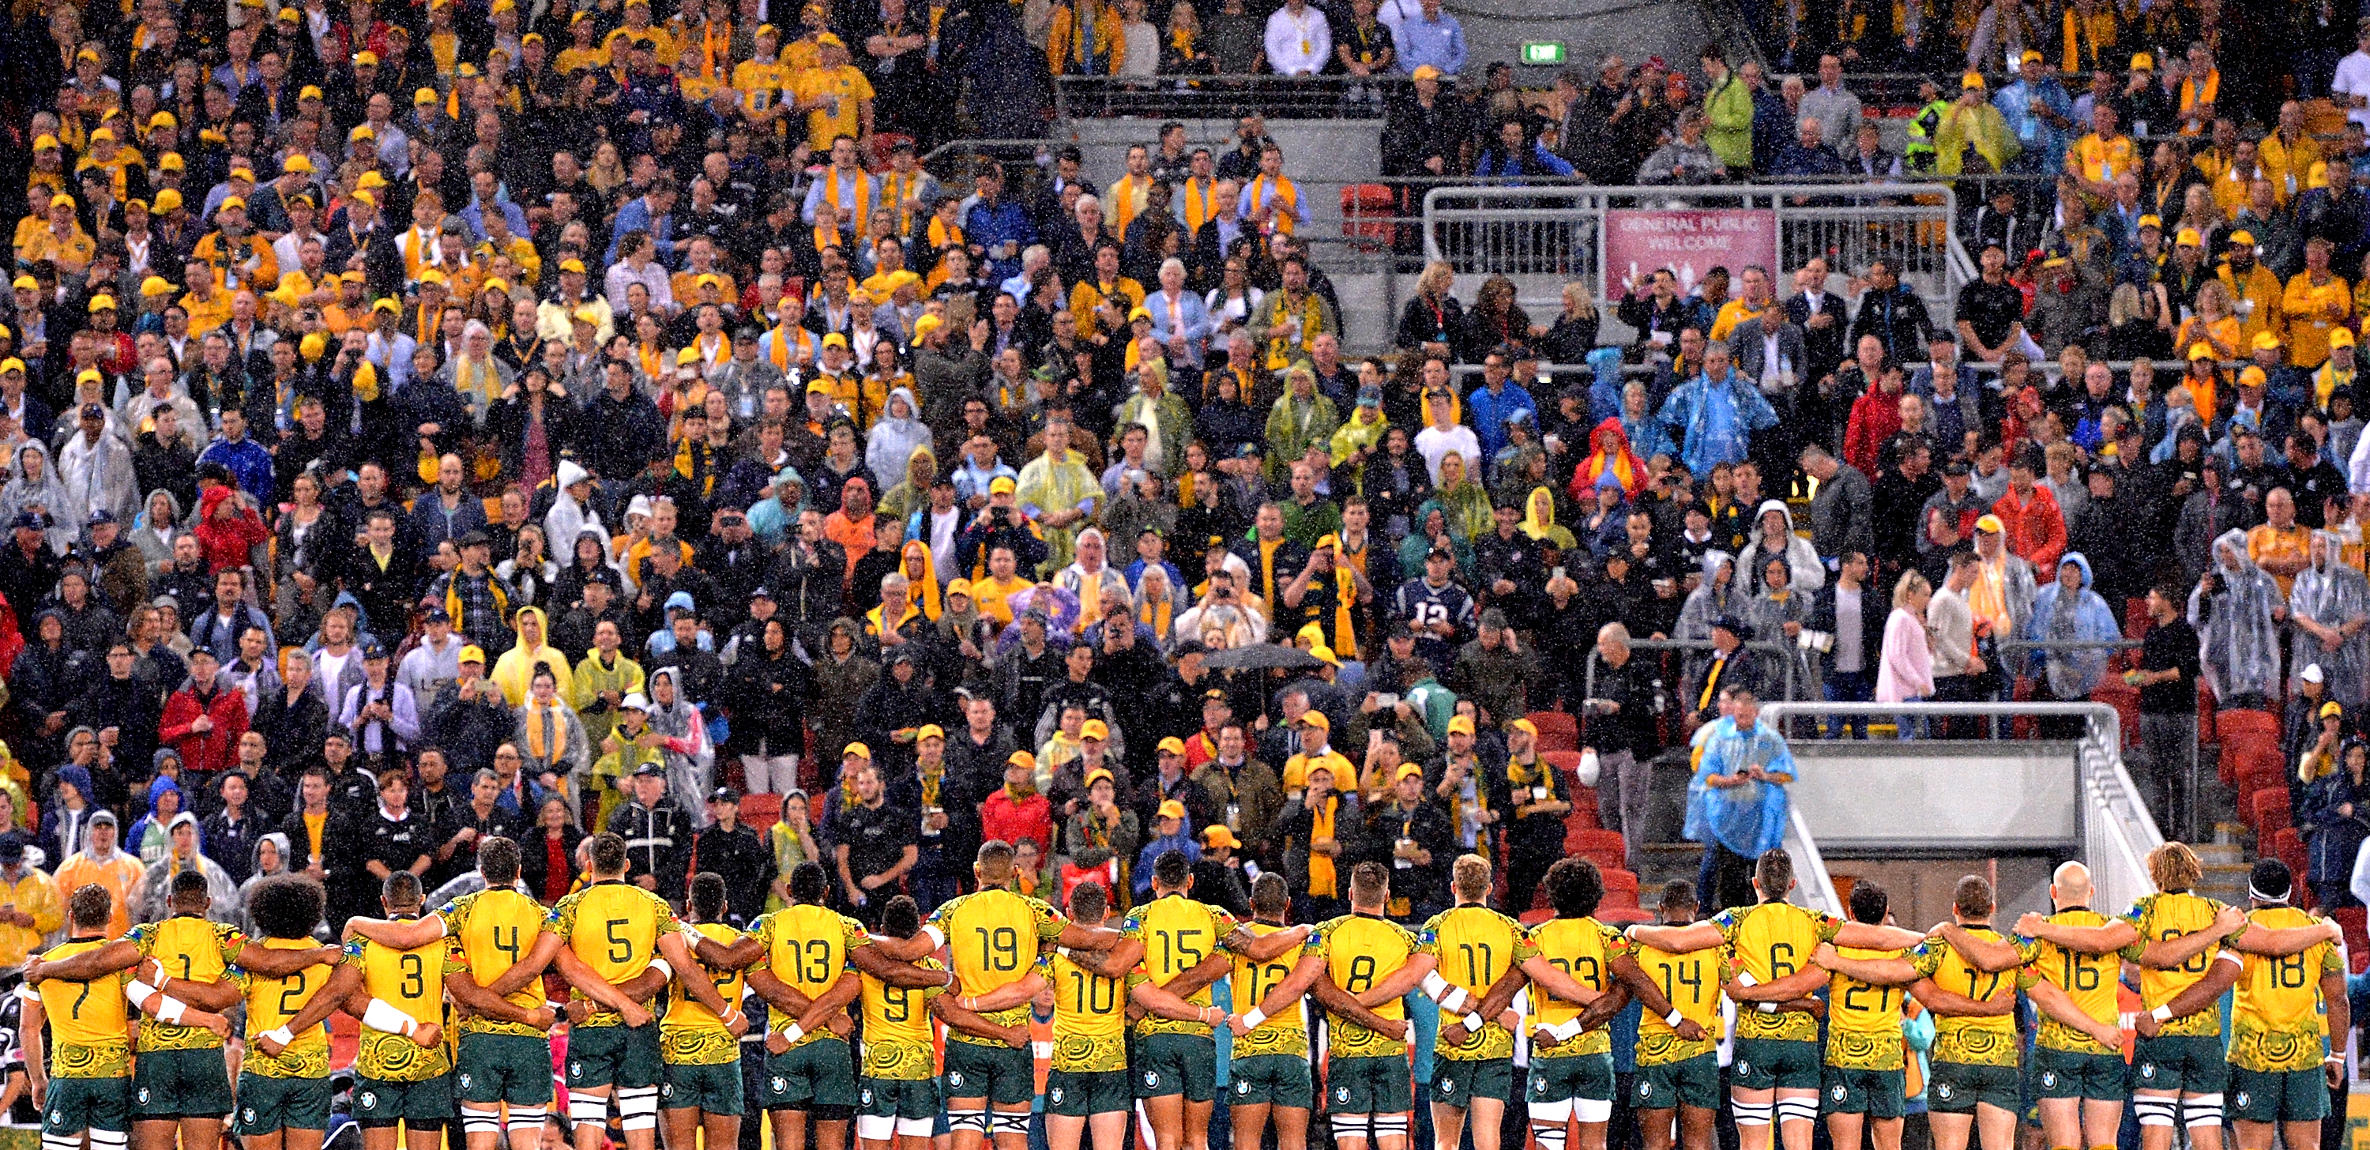 Fourteen Wallabies, one victory, and a long history of prejudice: Why the Indigenous jersey must be permanent